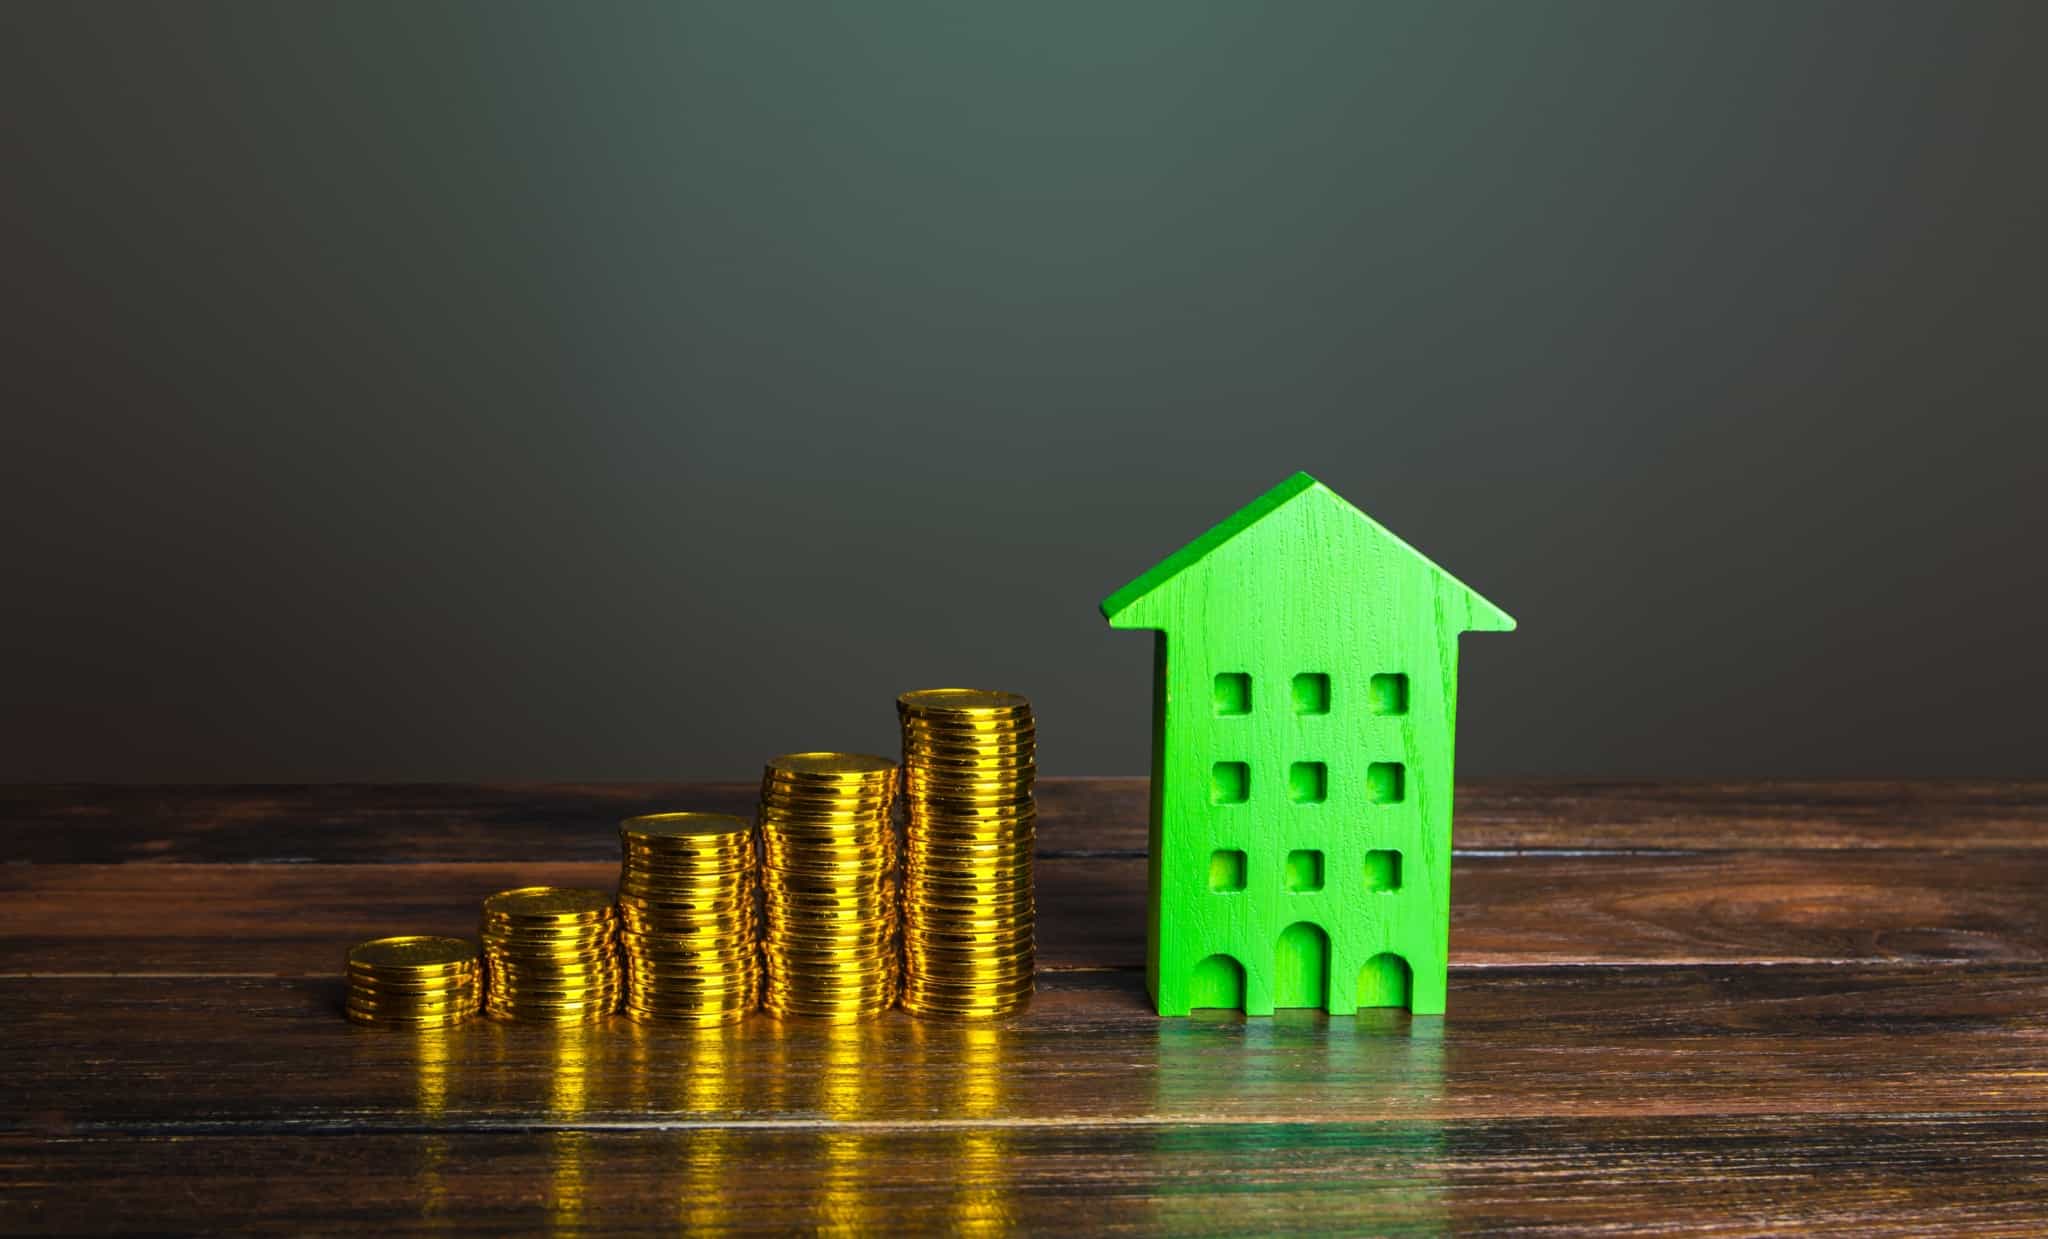 photographic production shows, on a dark background, a model of the facade of a building, in wood and green to point to sustainability, and beside it growing piles of coins, pointing to savings.  the set illustrates the need to invest in energy efficiency